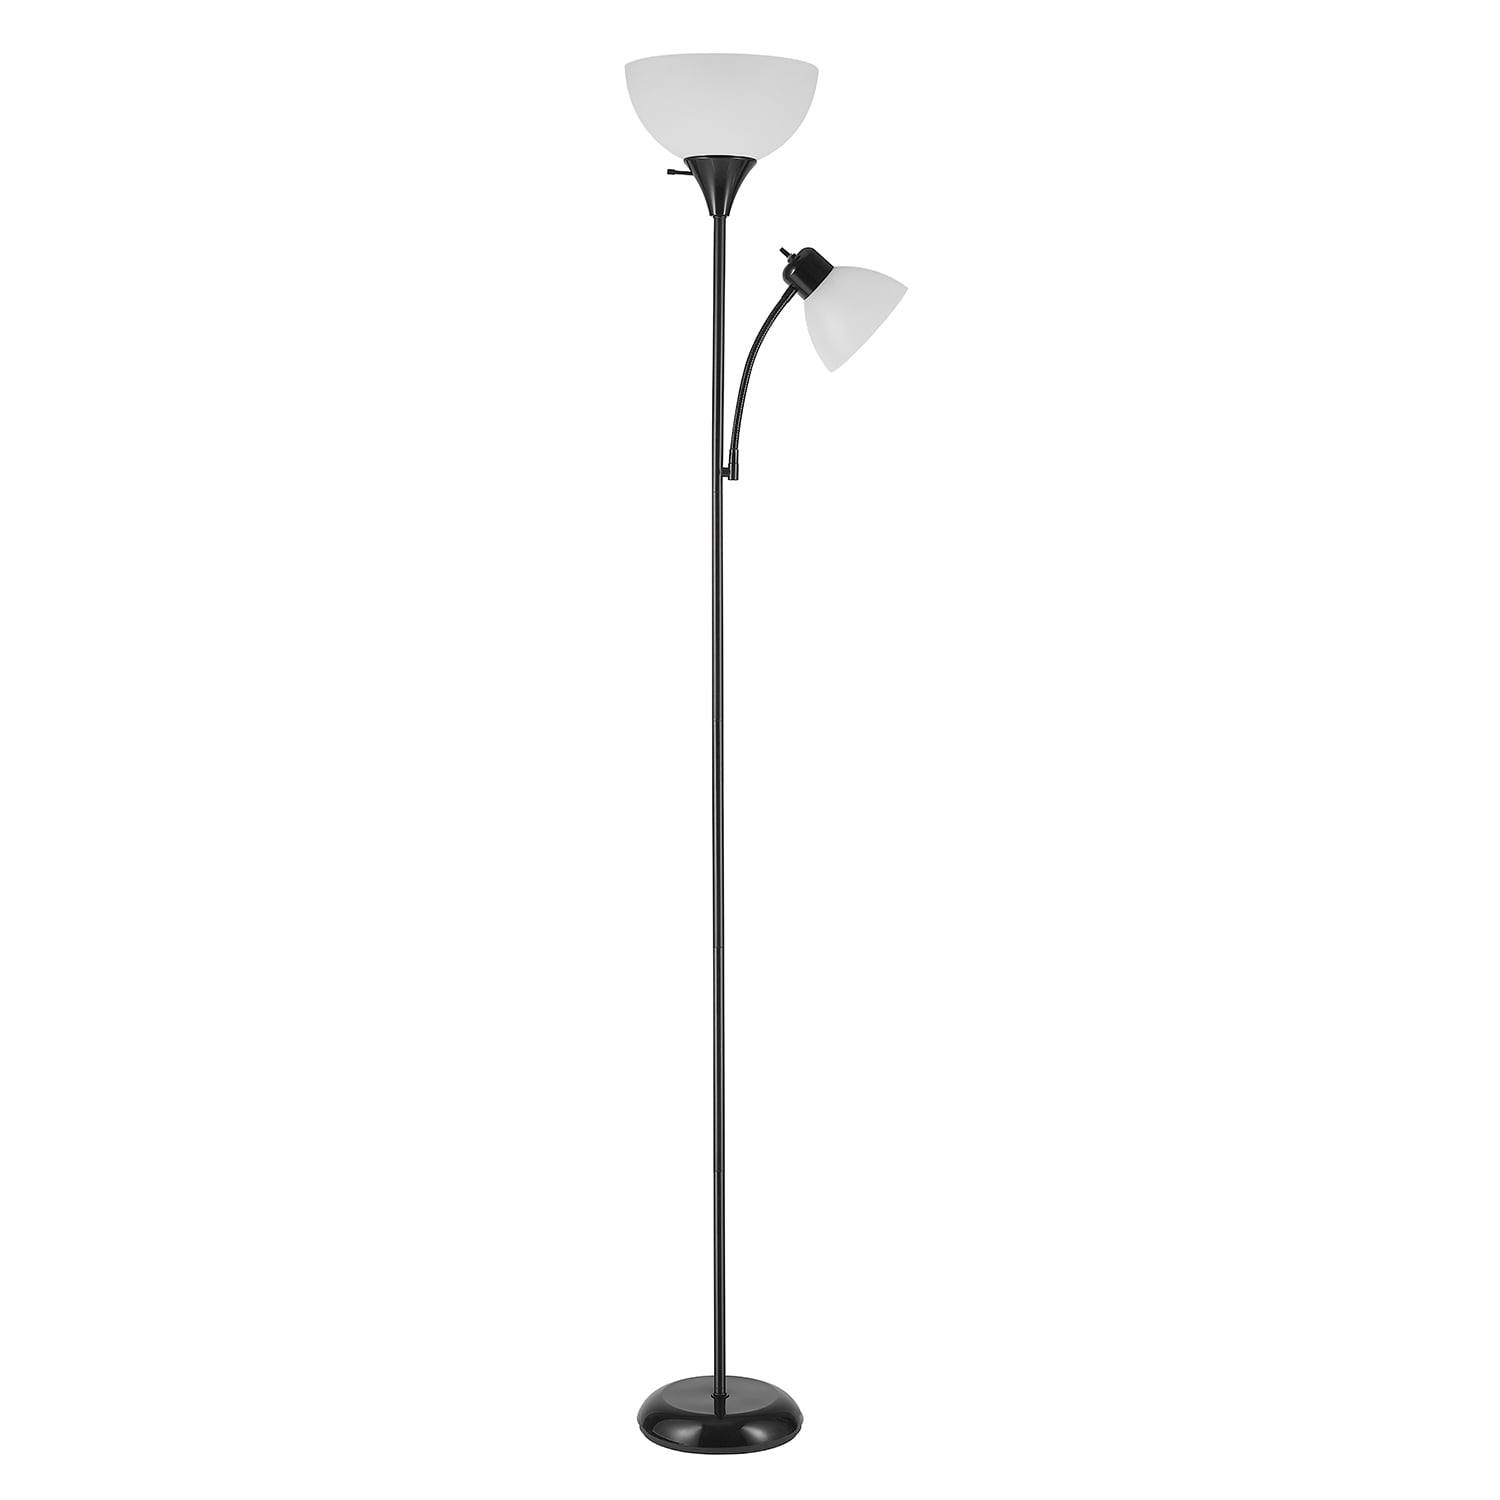 Better Homes & Gardens 61"H Floor Lamp, Black Finish with Real Wood Base, LED  Bulb Included - Walmart.com